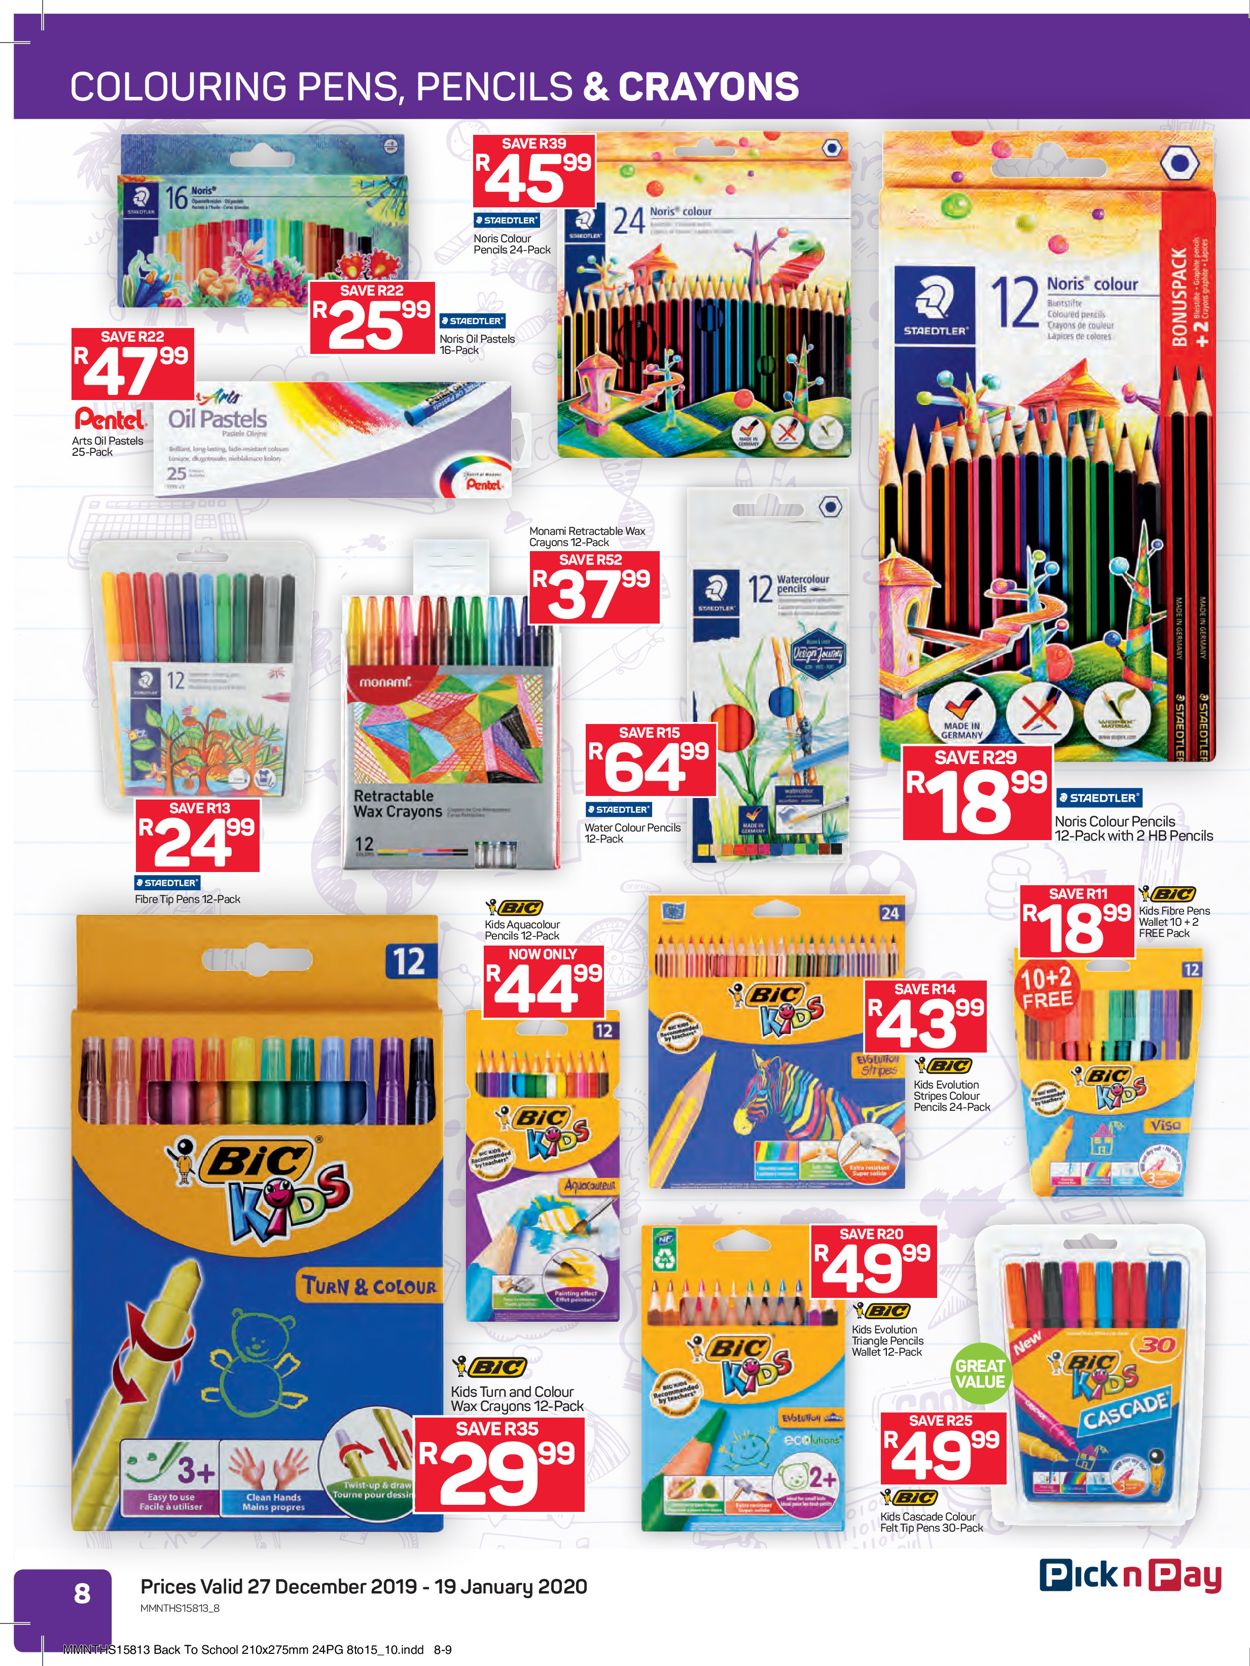 Pick n Pay Back 2 School Catalogue - 2019/12/27-2020/01/19 (Page 9)